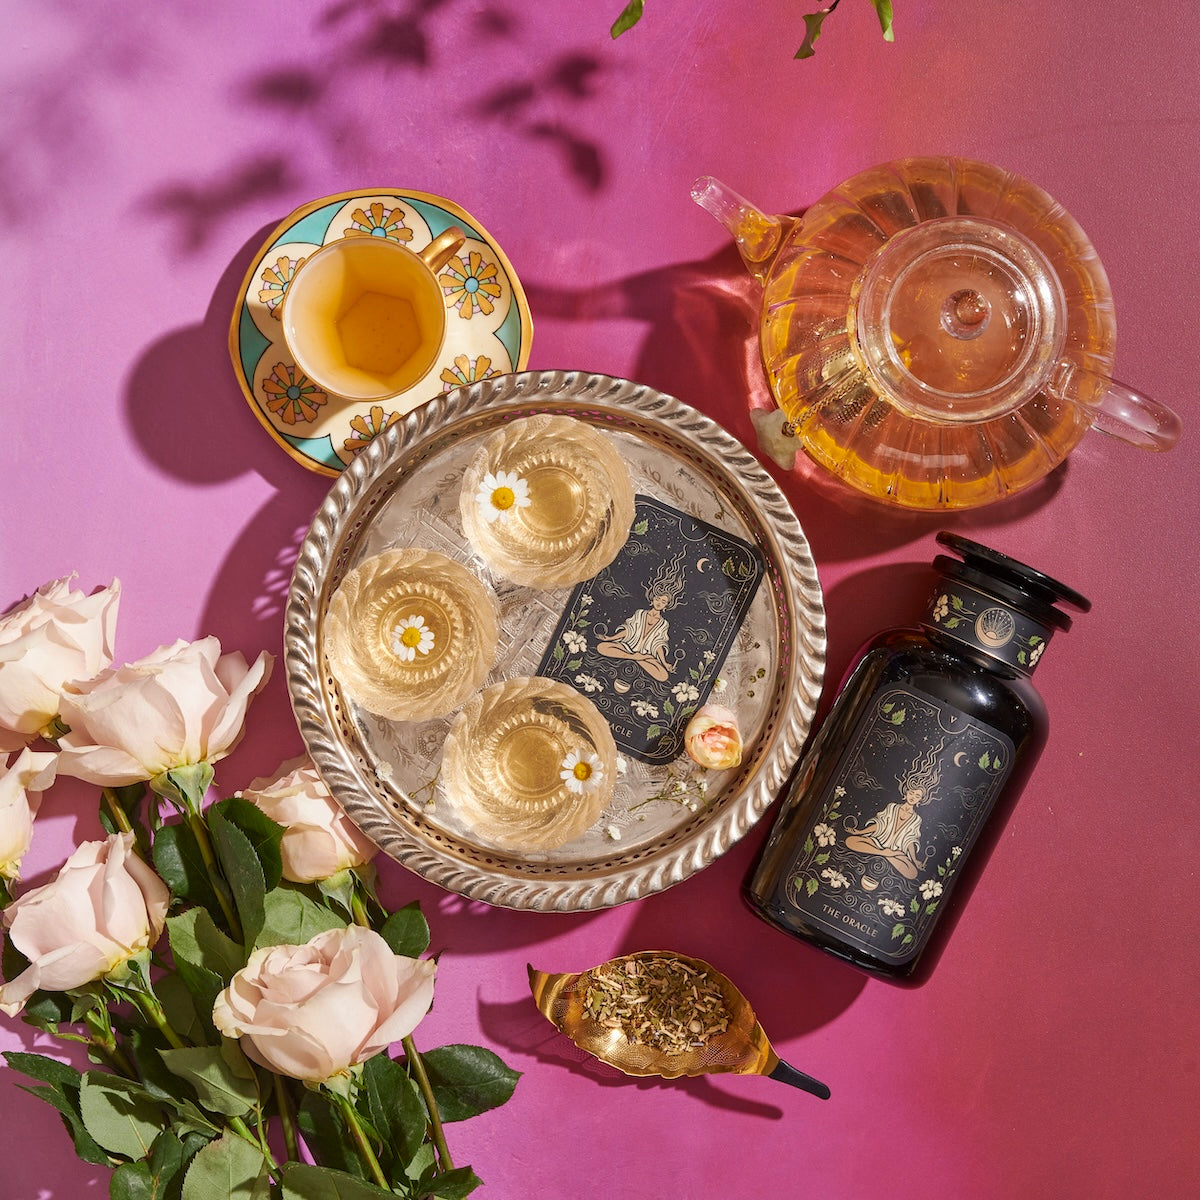 A tea setup with a teapot filled with wellness teas, floral-patterned teacups, and a matching floral tea tin on a vibrant pink and purple surface. Fresh white roses and a spoon containing loose tea leaves from the Monthly Magic First Sips Tea Subscription Box by Magic Hour are also visible for an elegant, serene ambiance.